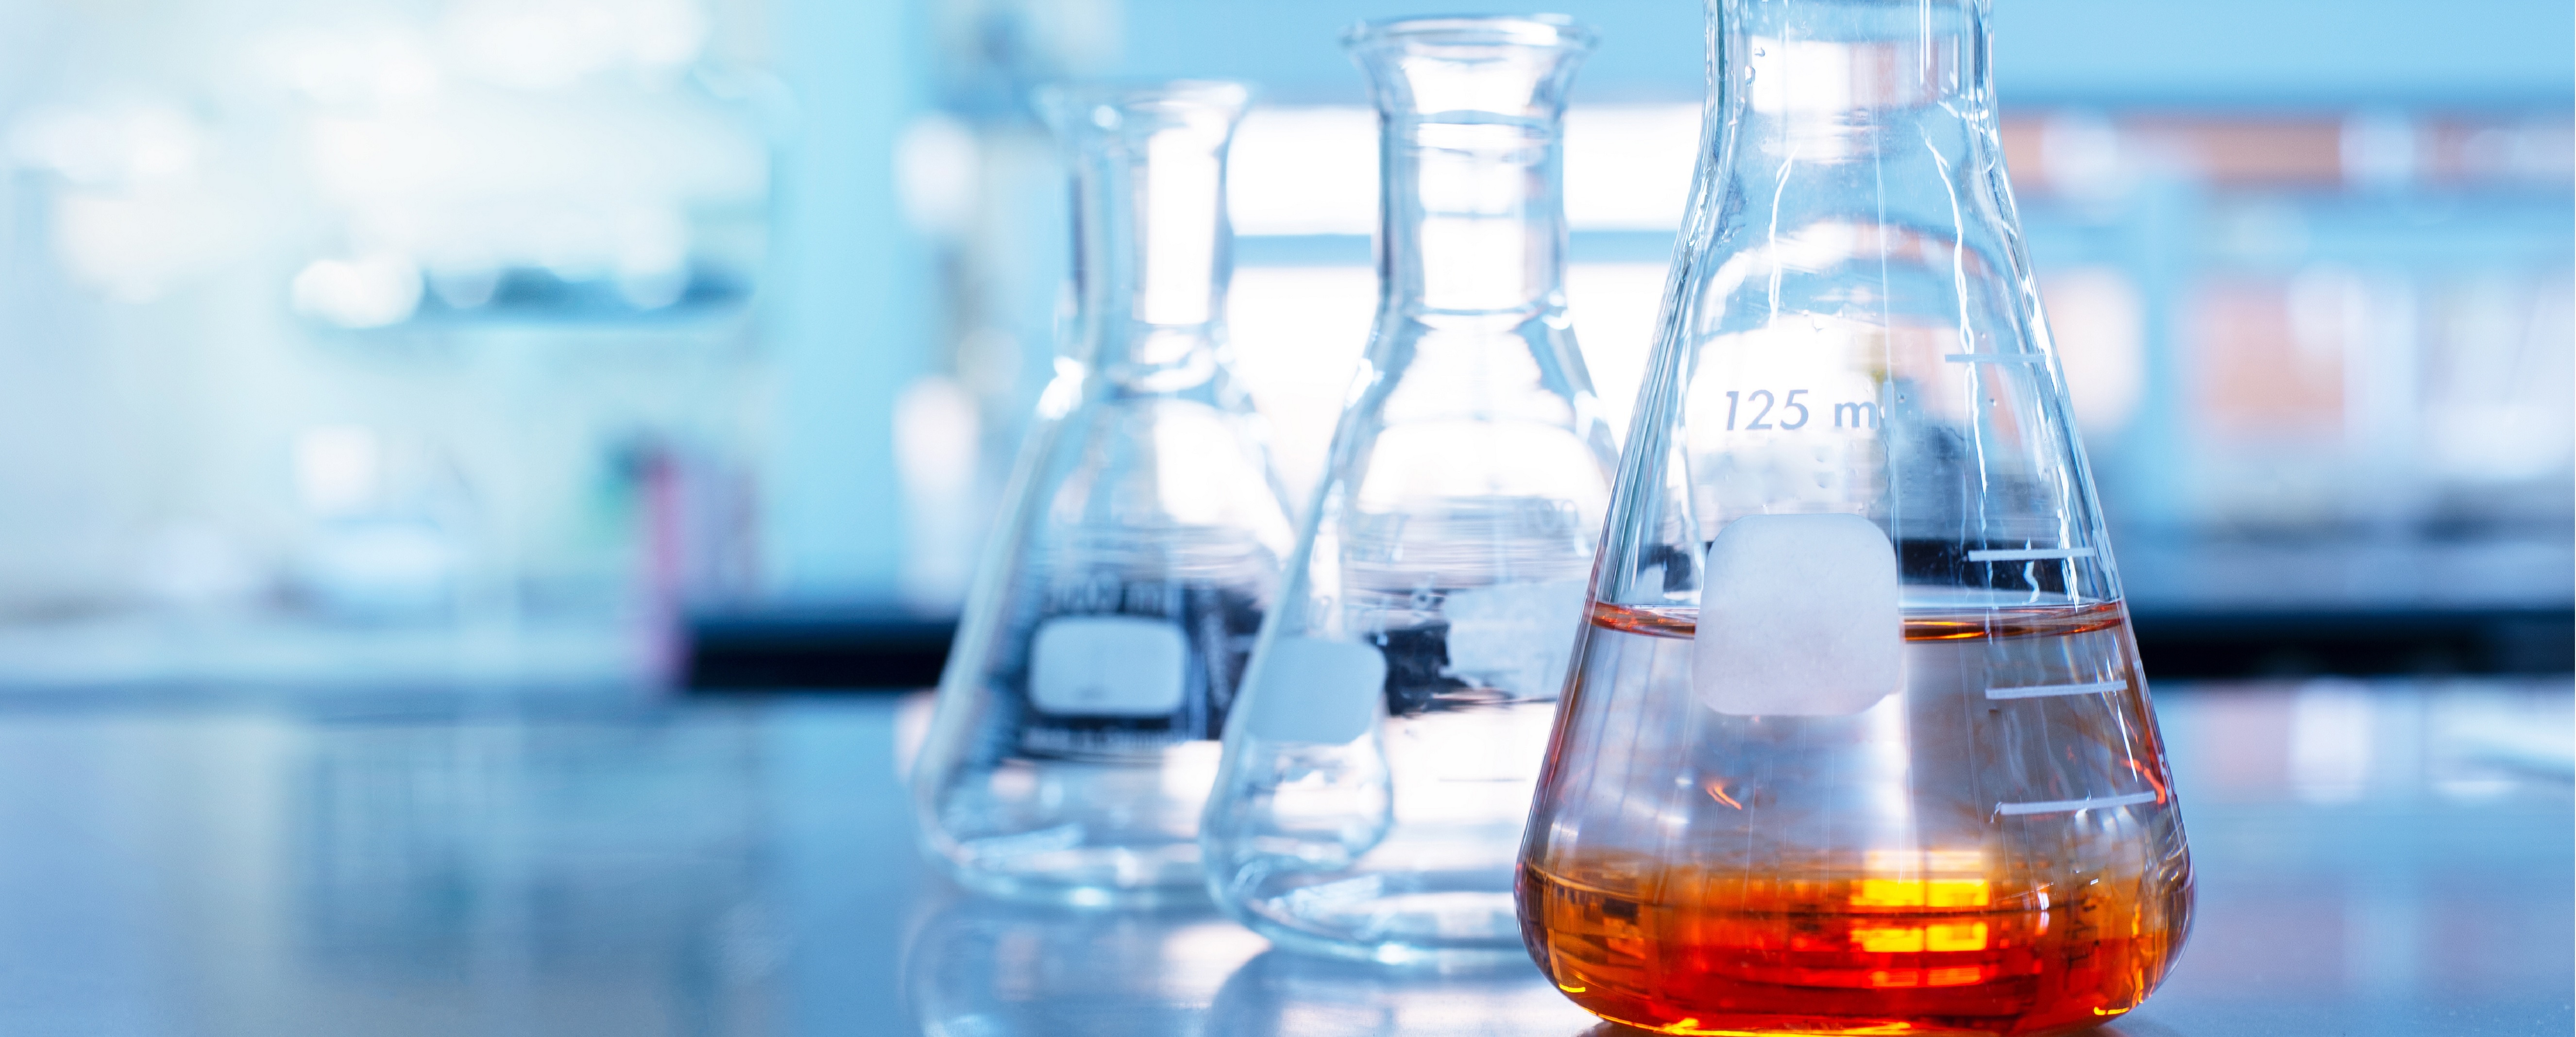 Specialty chemicals in flasks representing chemical process plant design capabilities